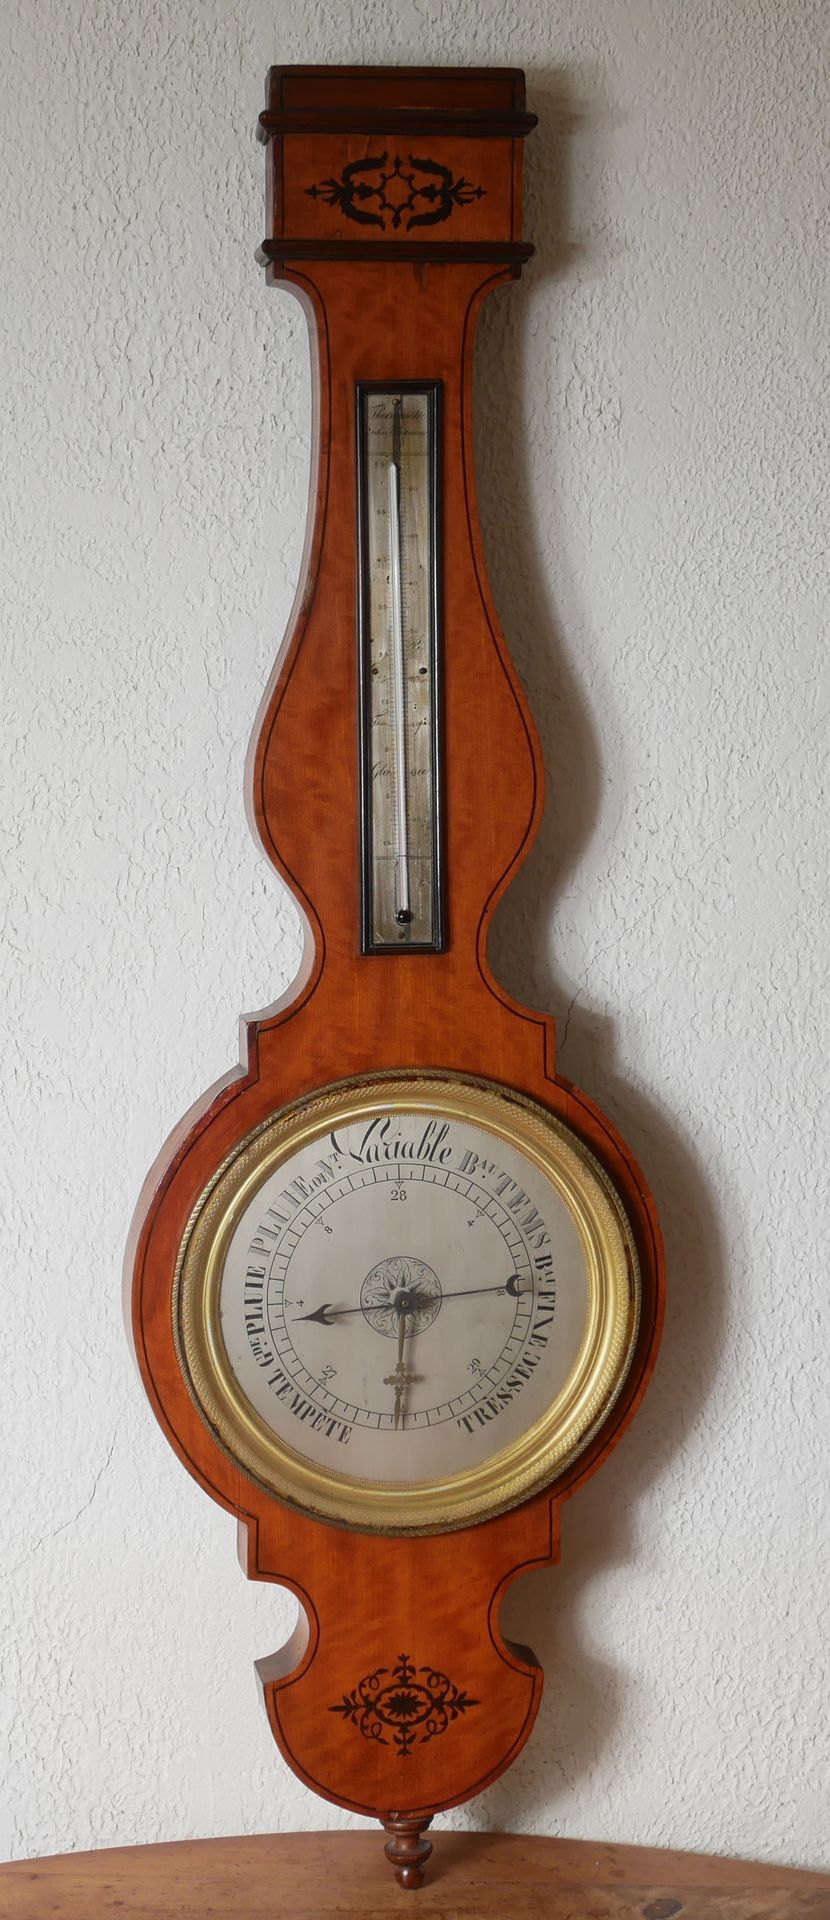 Null Barometer-thermometer in veneer

H : 103 cm (chips, missing parts)